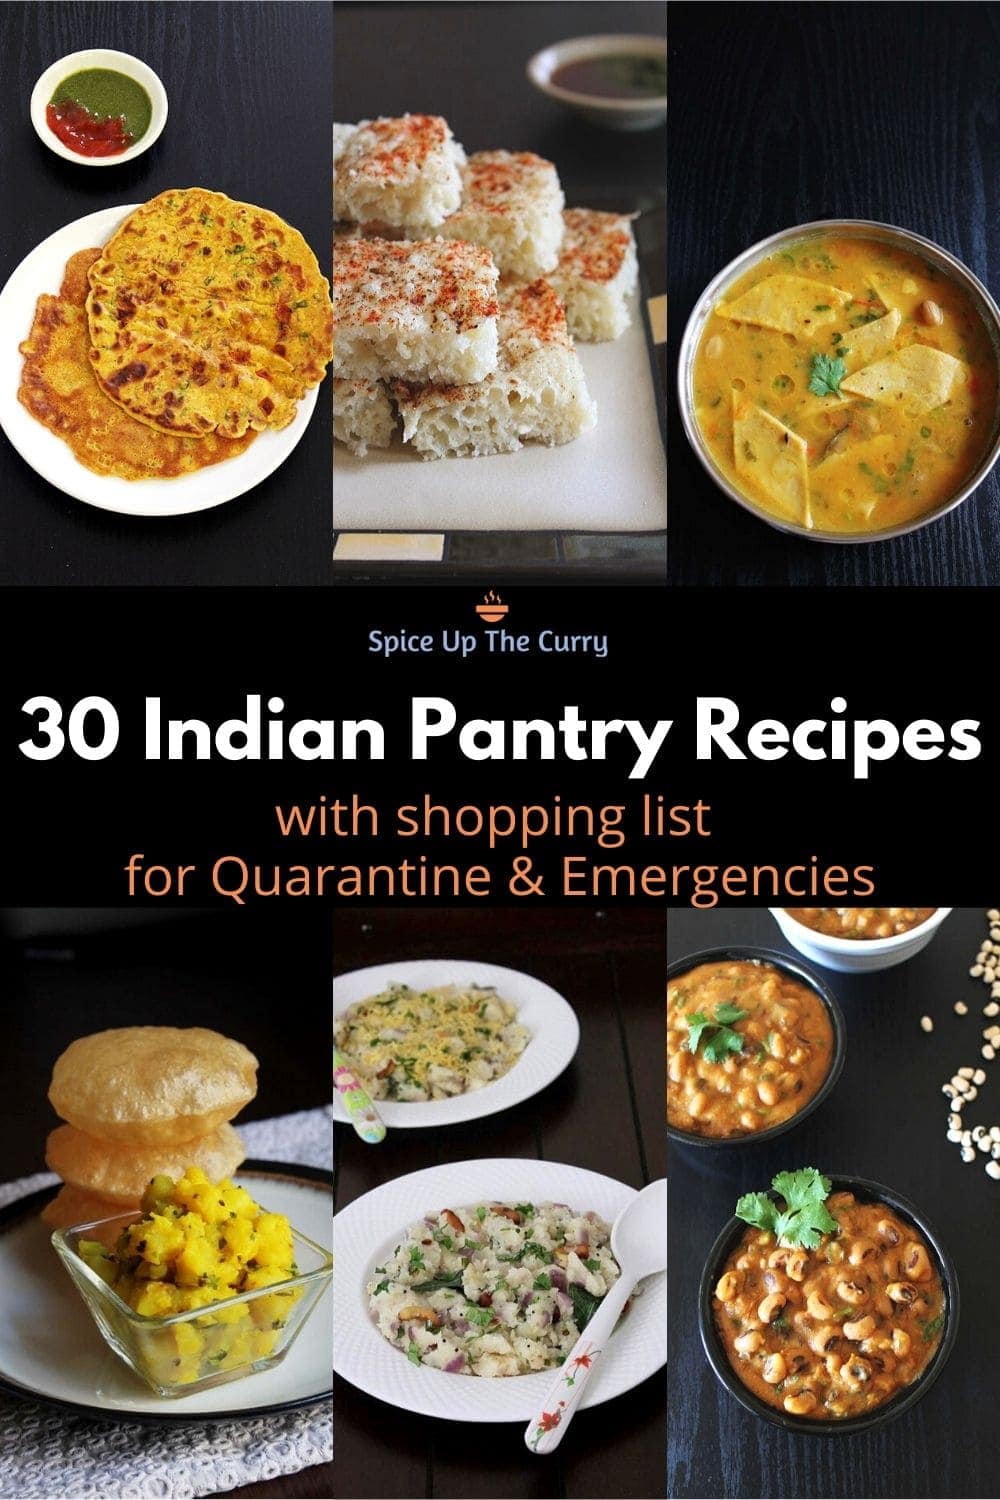 Indian pantry recipes for emergencies